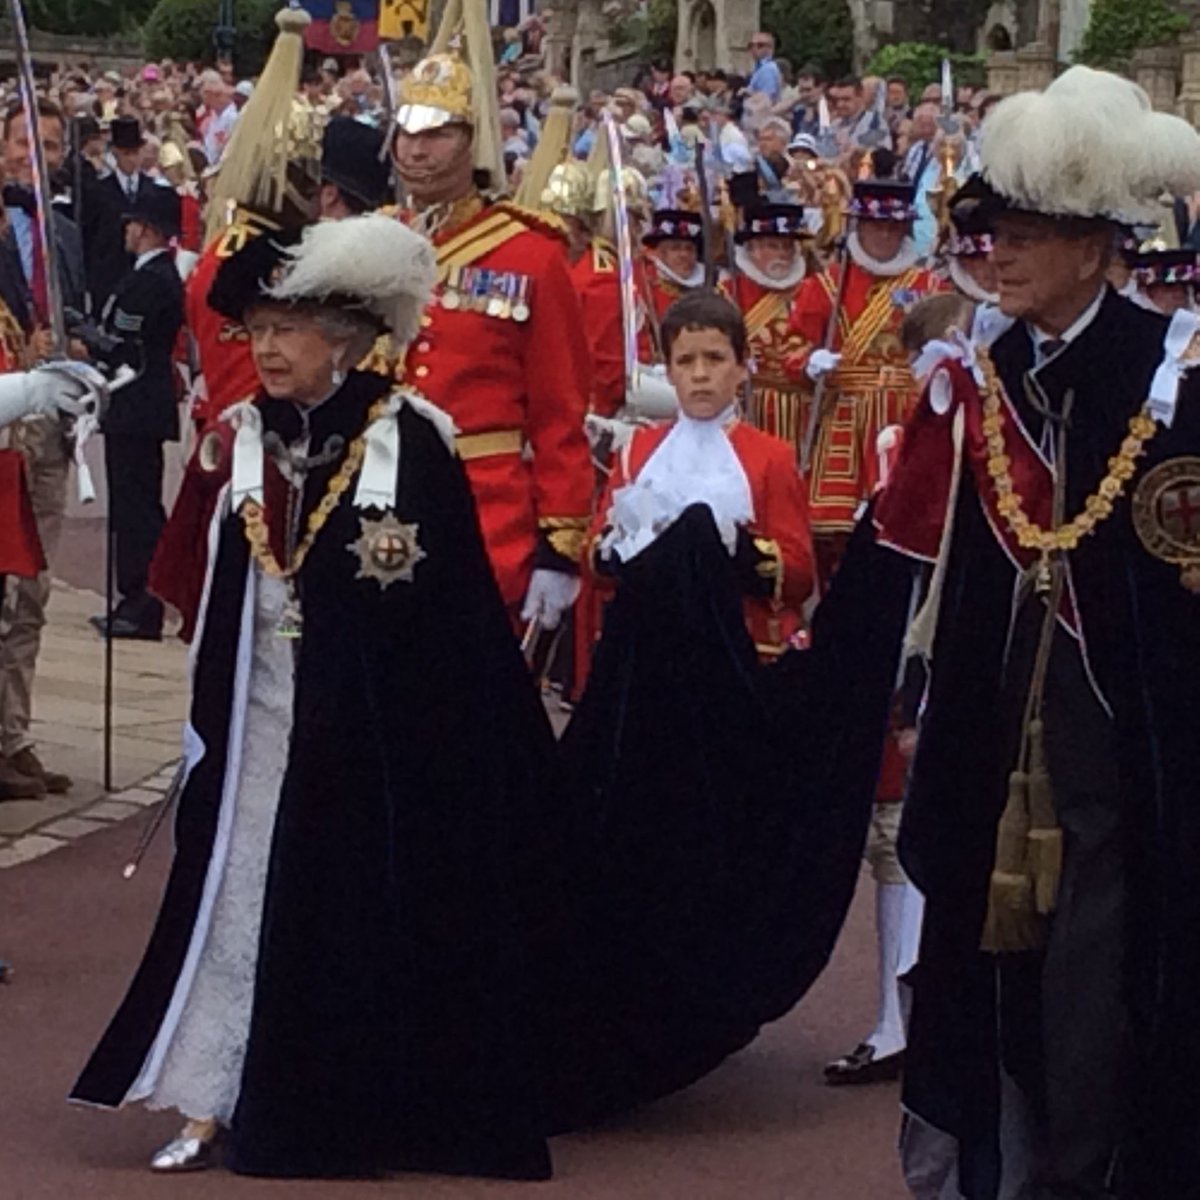 ....and finally at the Order of the Garter in 2015.....